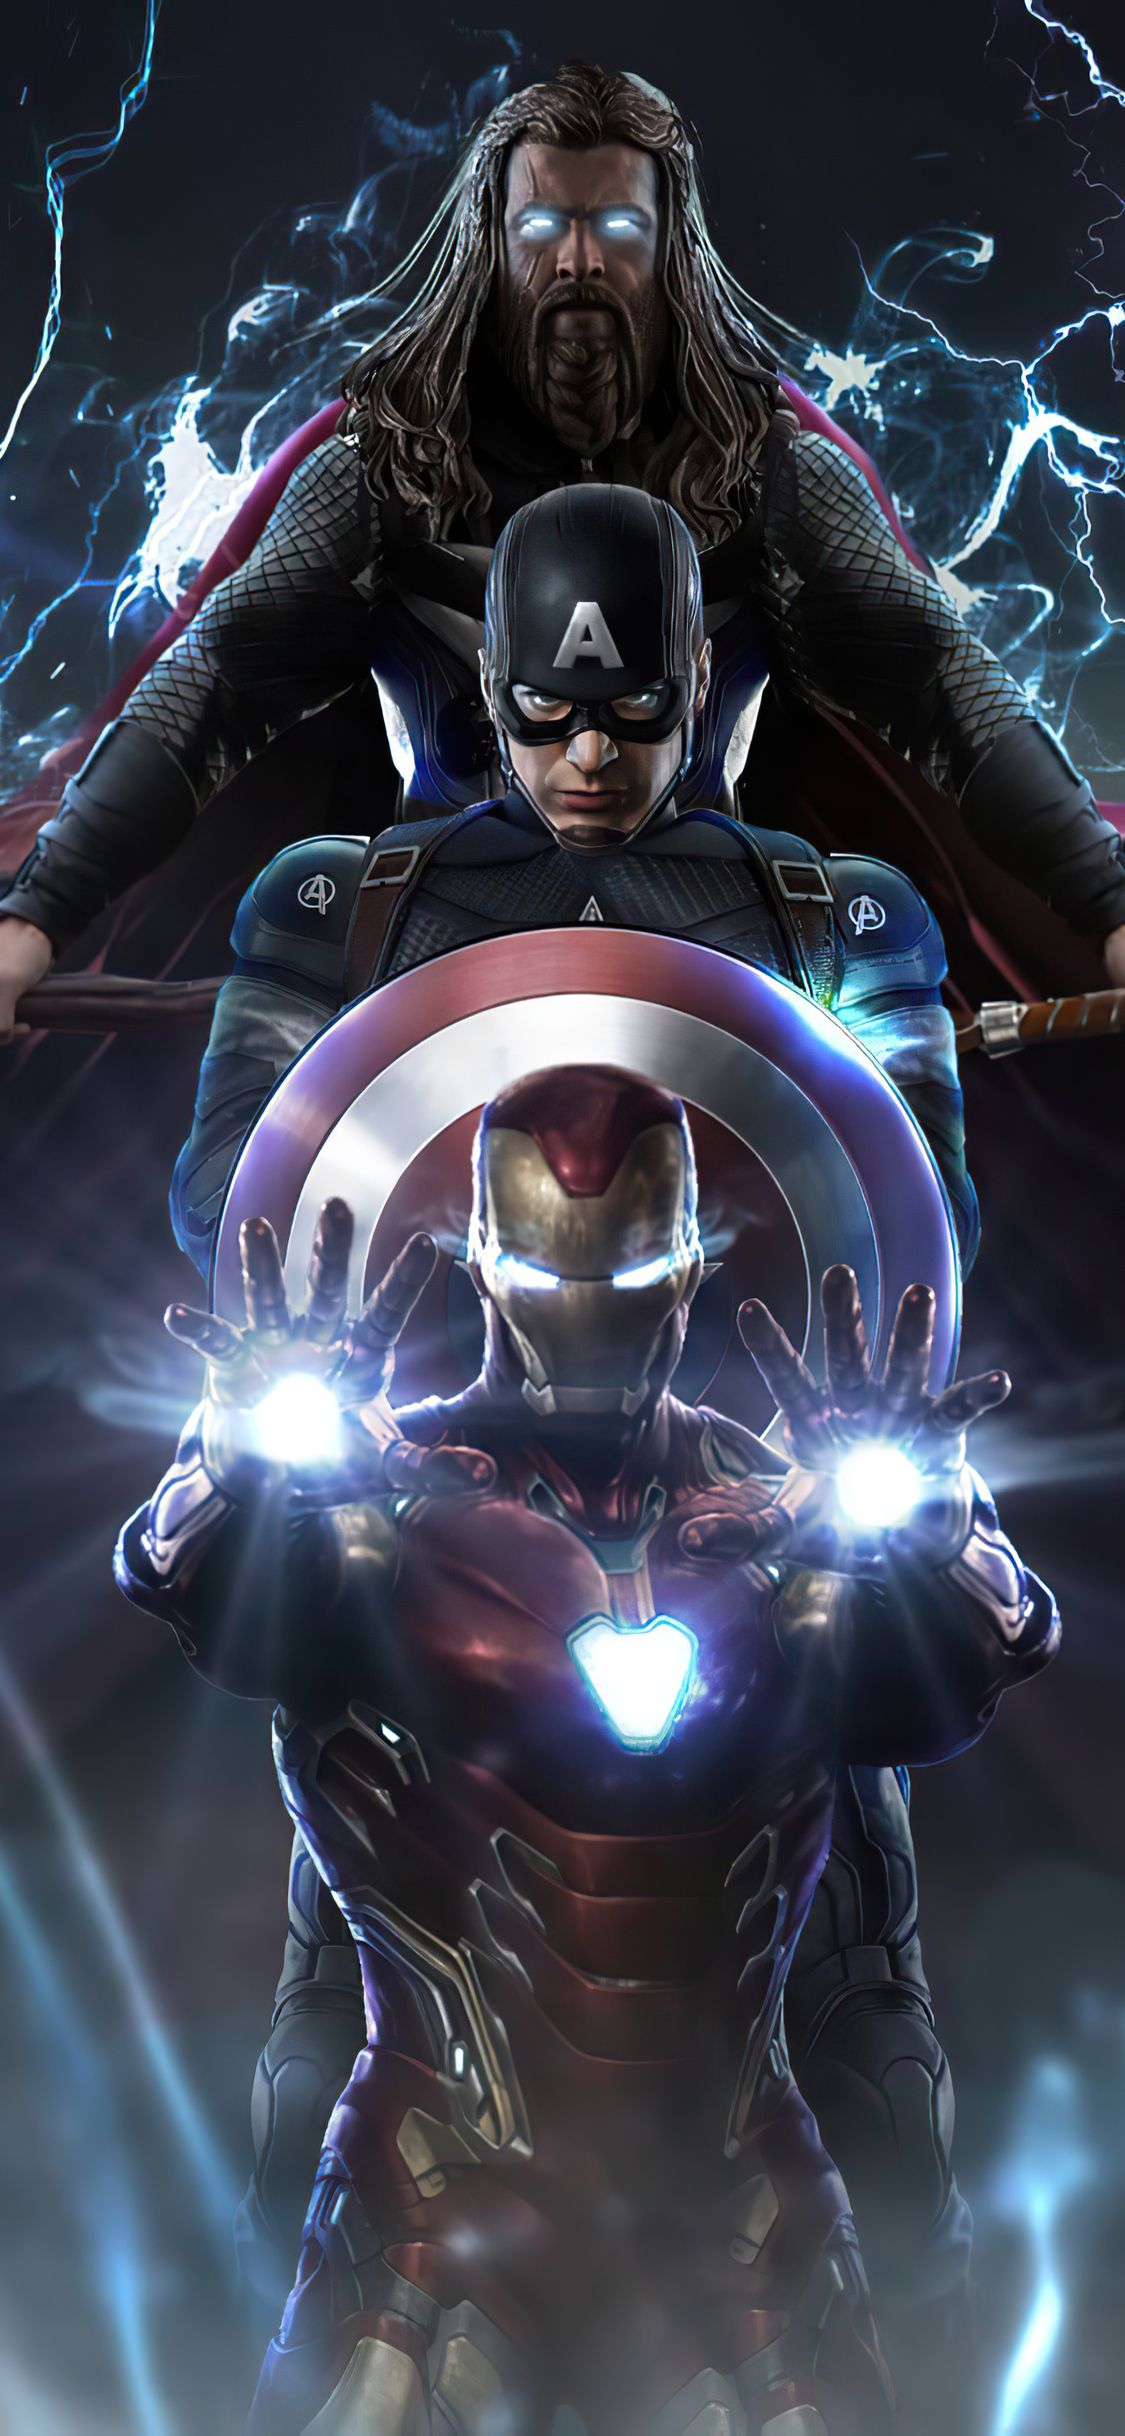 Thor And Captain America 4k iPhone XS, iPhone iPhone X HD 4k Wallpaper, Image, Background, Photo and Picture